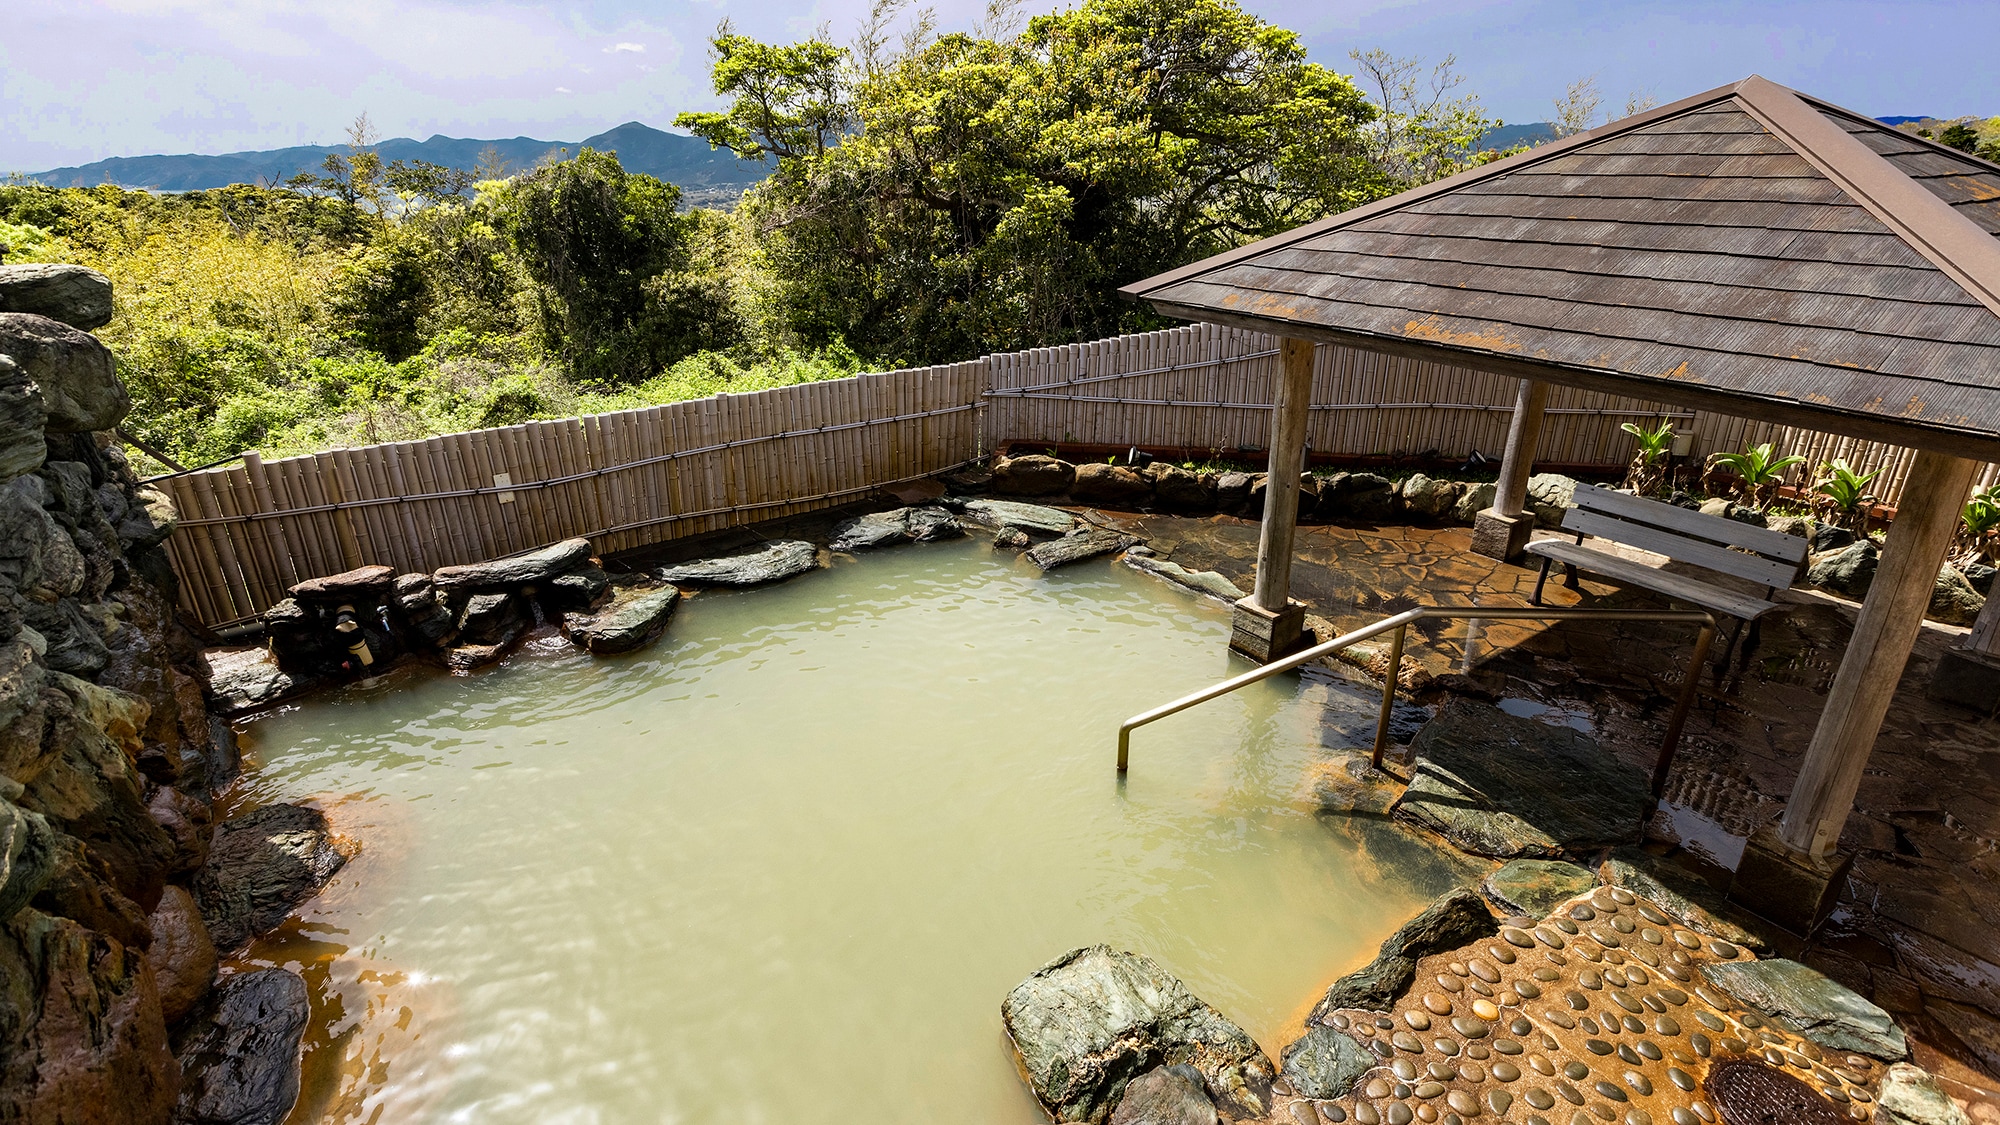 [Open-air bath - Okudake Onsen] Characterized by brown cloudy water! This natural hot spring is effective in relieving fatigue and warms the body from the core.